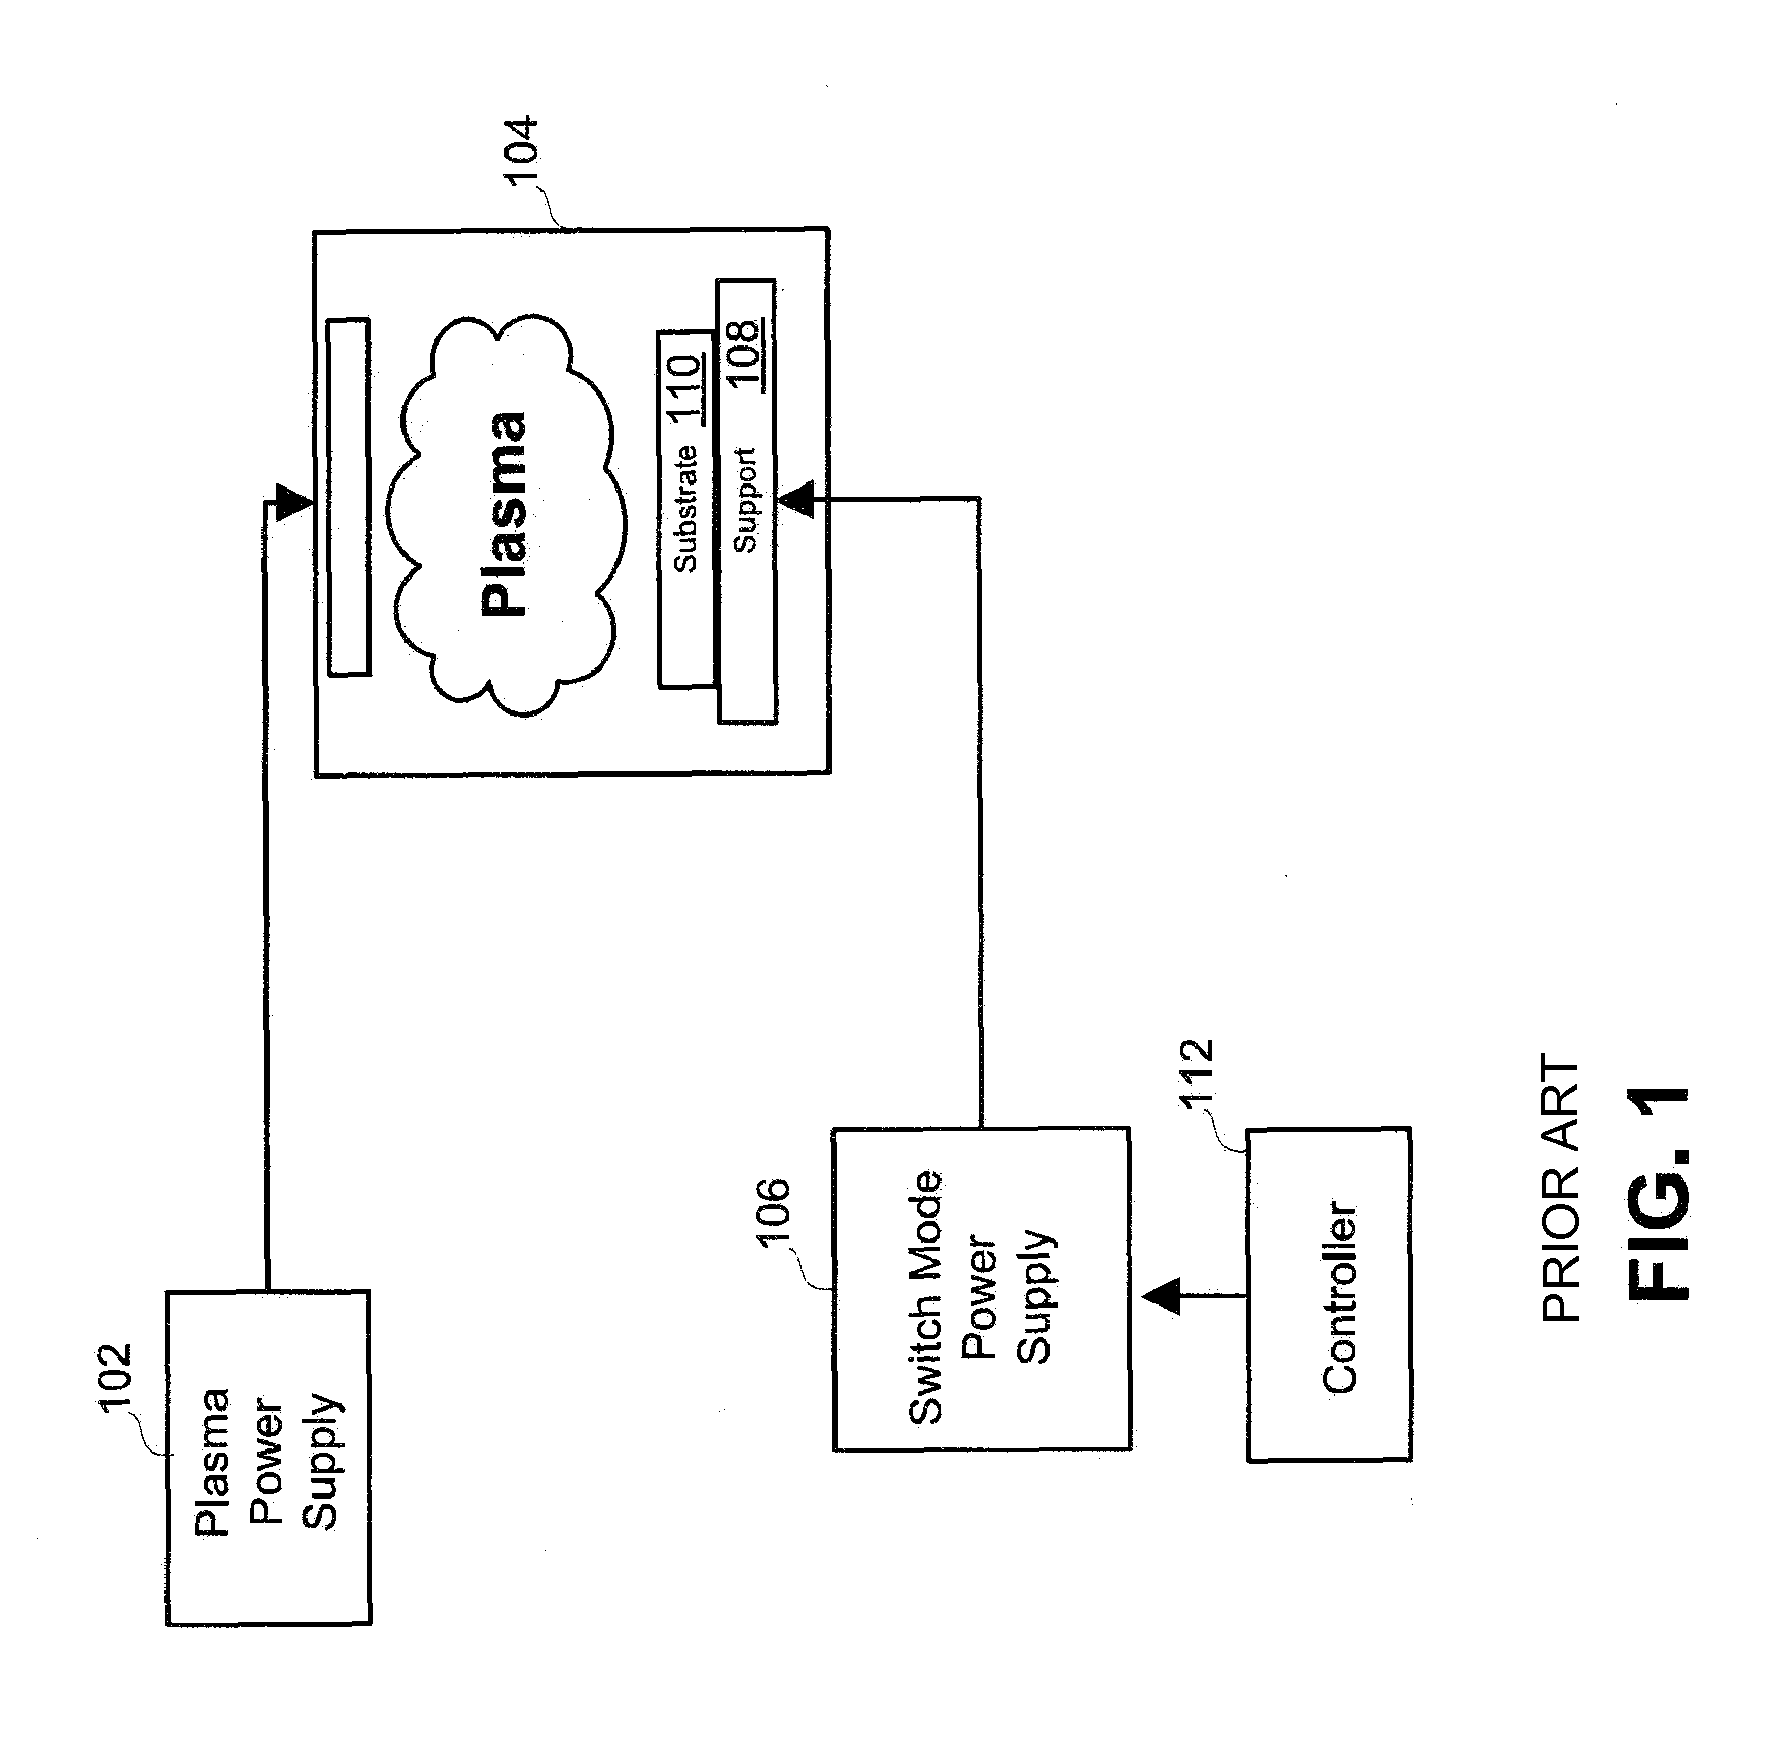 Systems and methods for calibrating a switched mode ion energy distribution system